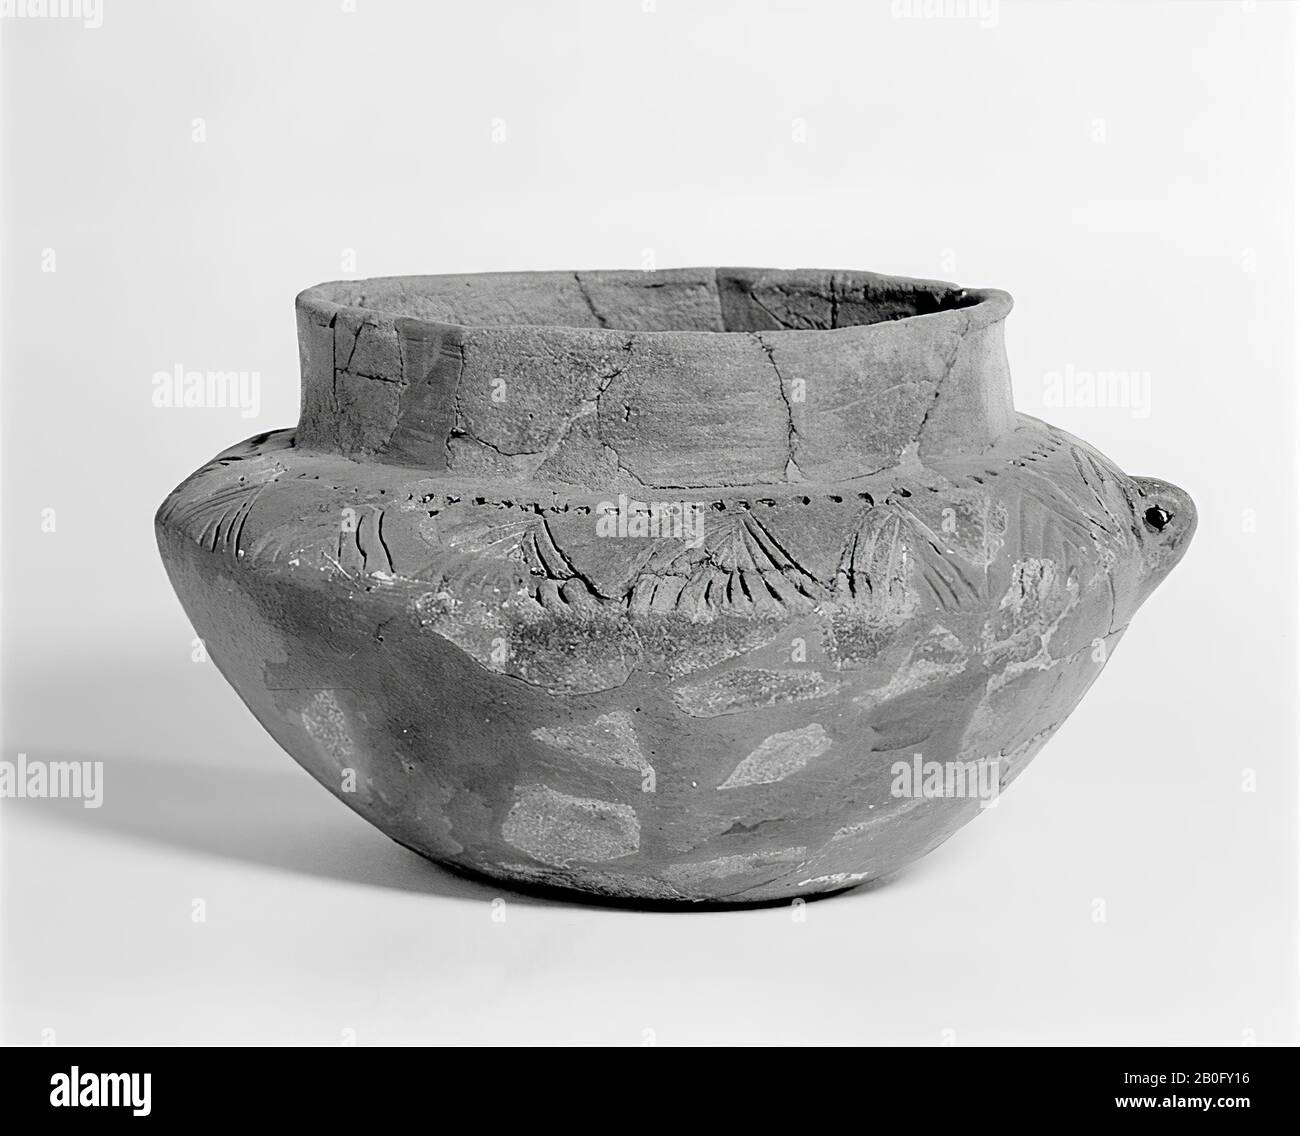 Wide, flat Hallstatturntje of earthenware with earpiece, decorated. Old bondings and additions. Contains cremated residues, urn, earthenware, h: 11.5 cm, diam: 20.5 cm, prehistory -1200 Stock Photo